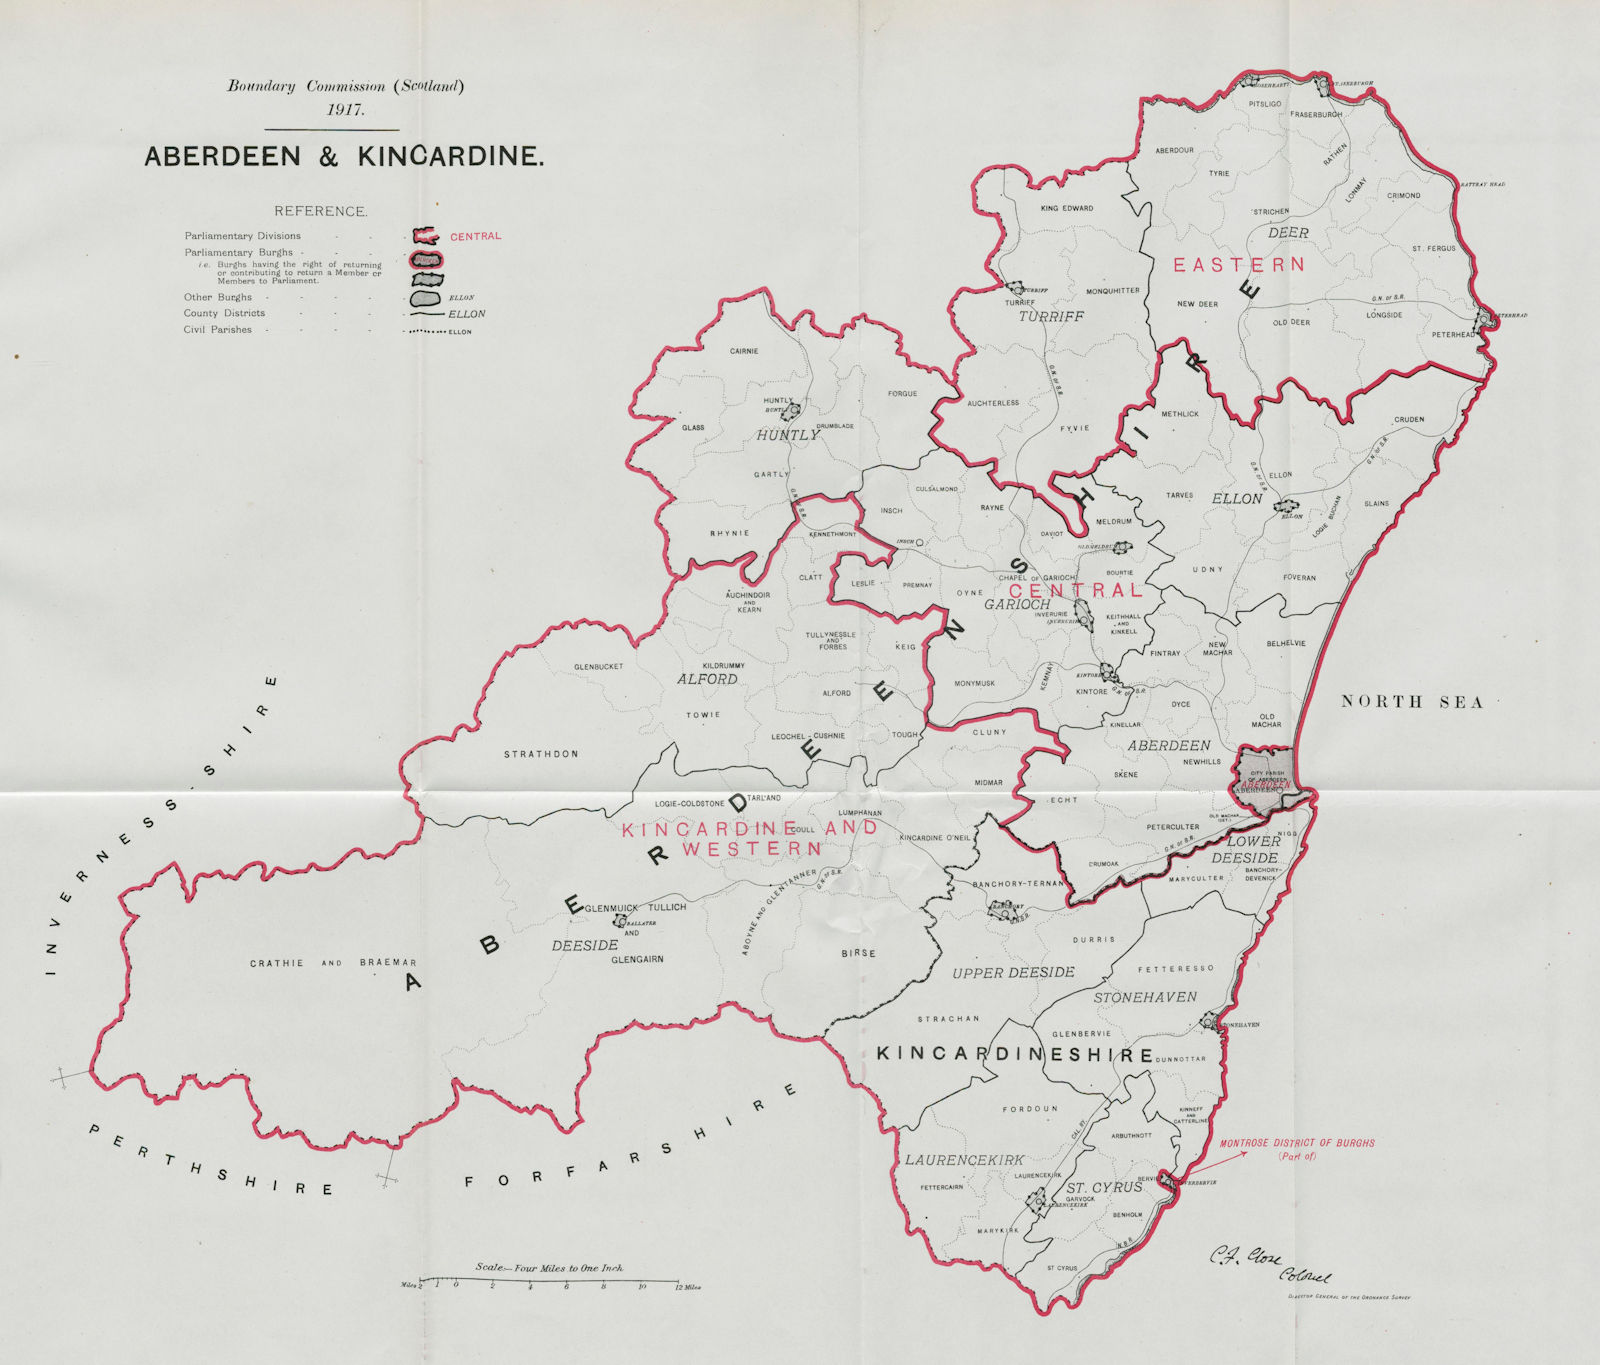 Associate Product Aberdeen & Kincardine Parliamentary County. BOUNDARY COMMISSION 1917 old map